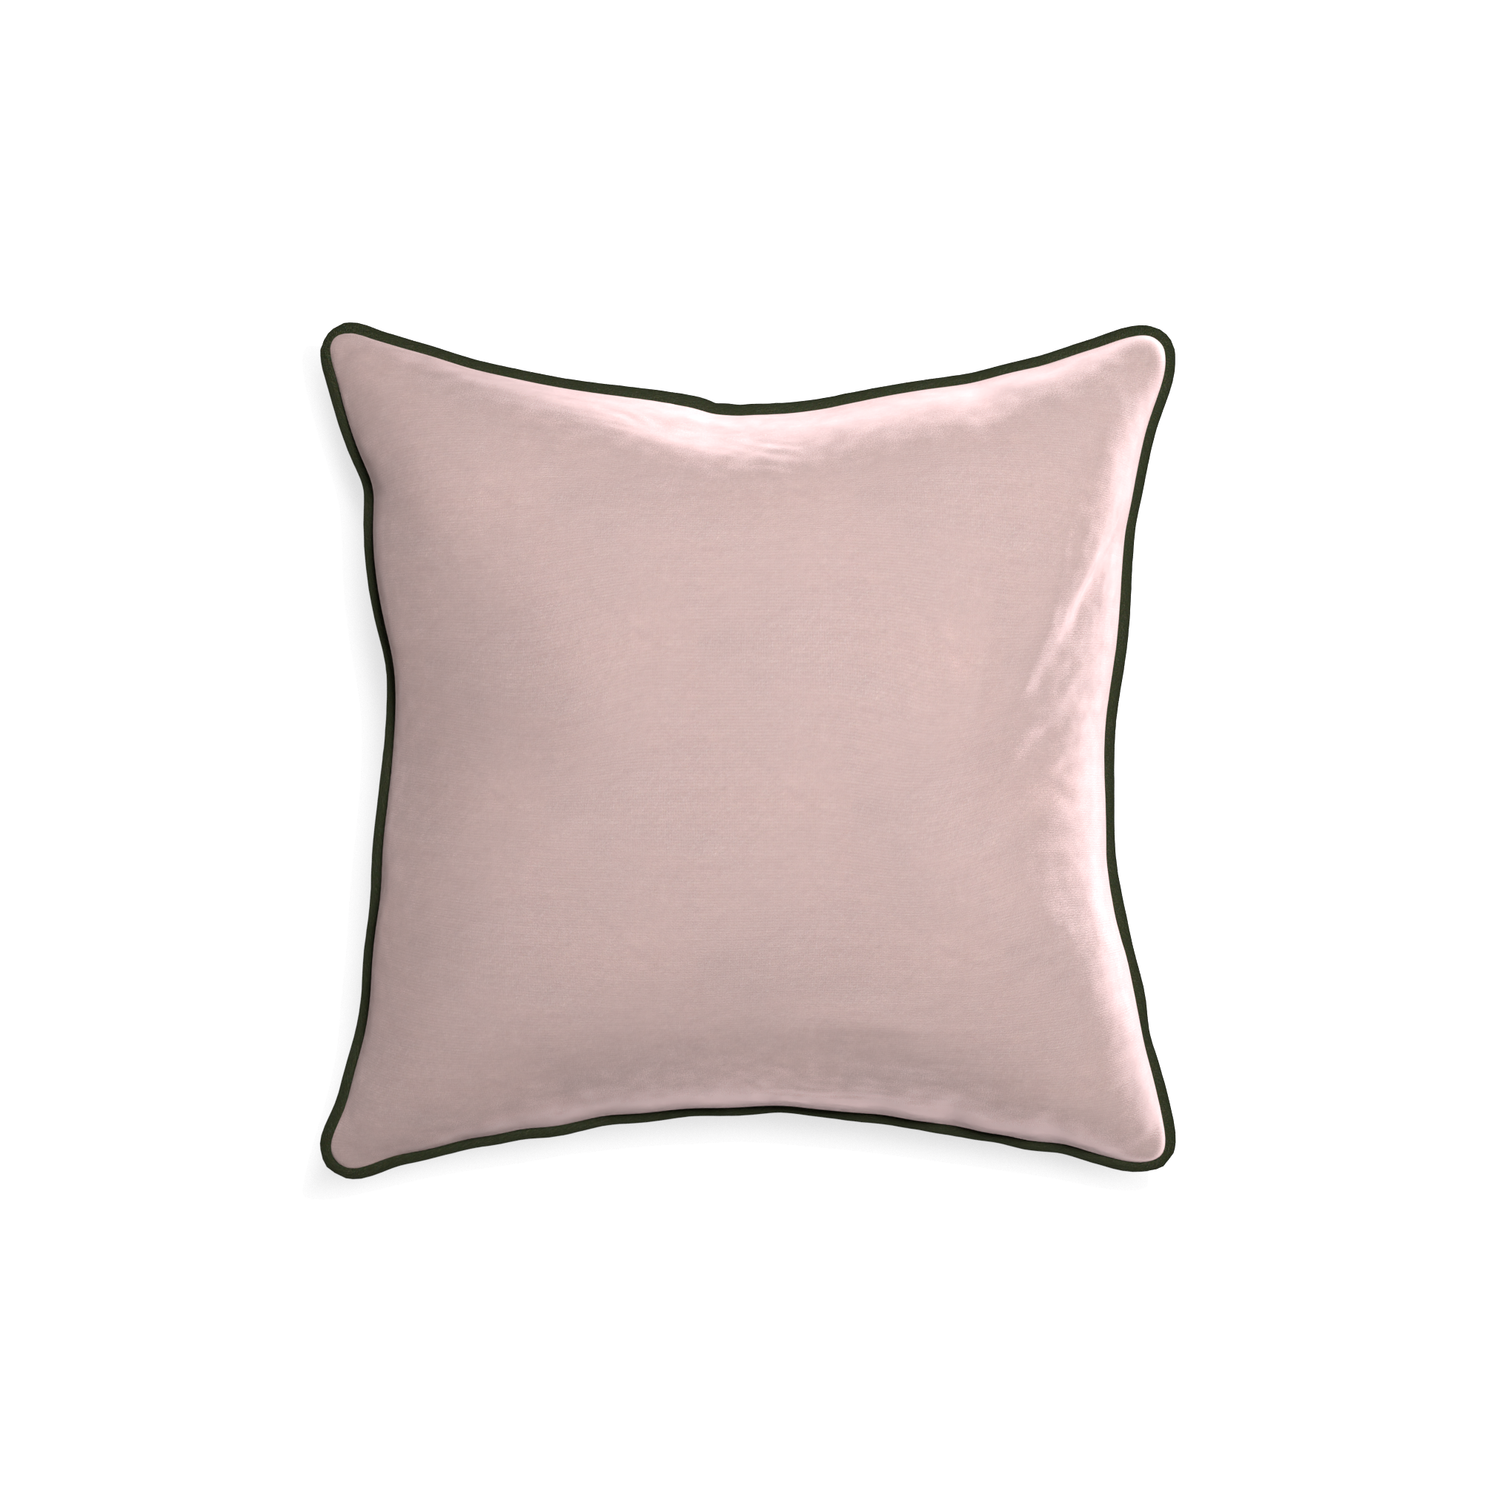 square light pink velvet pillow with fern green piping